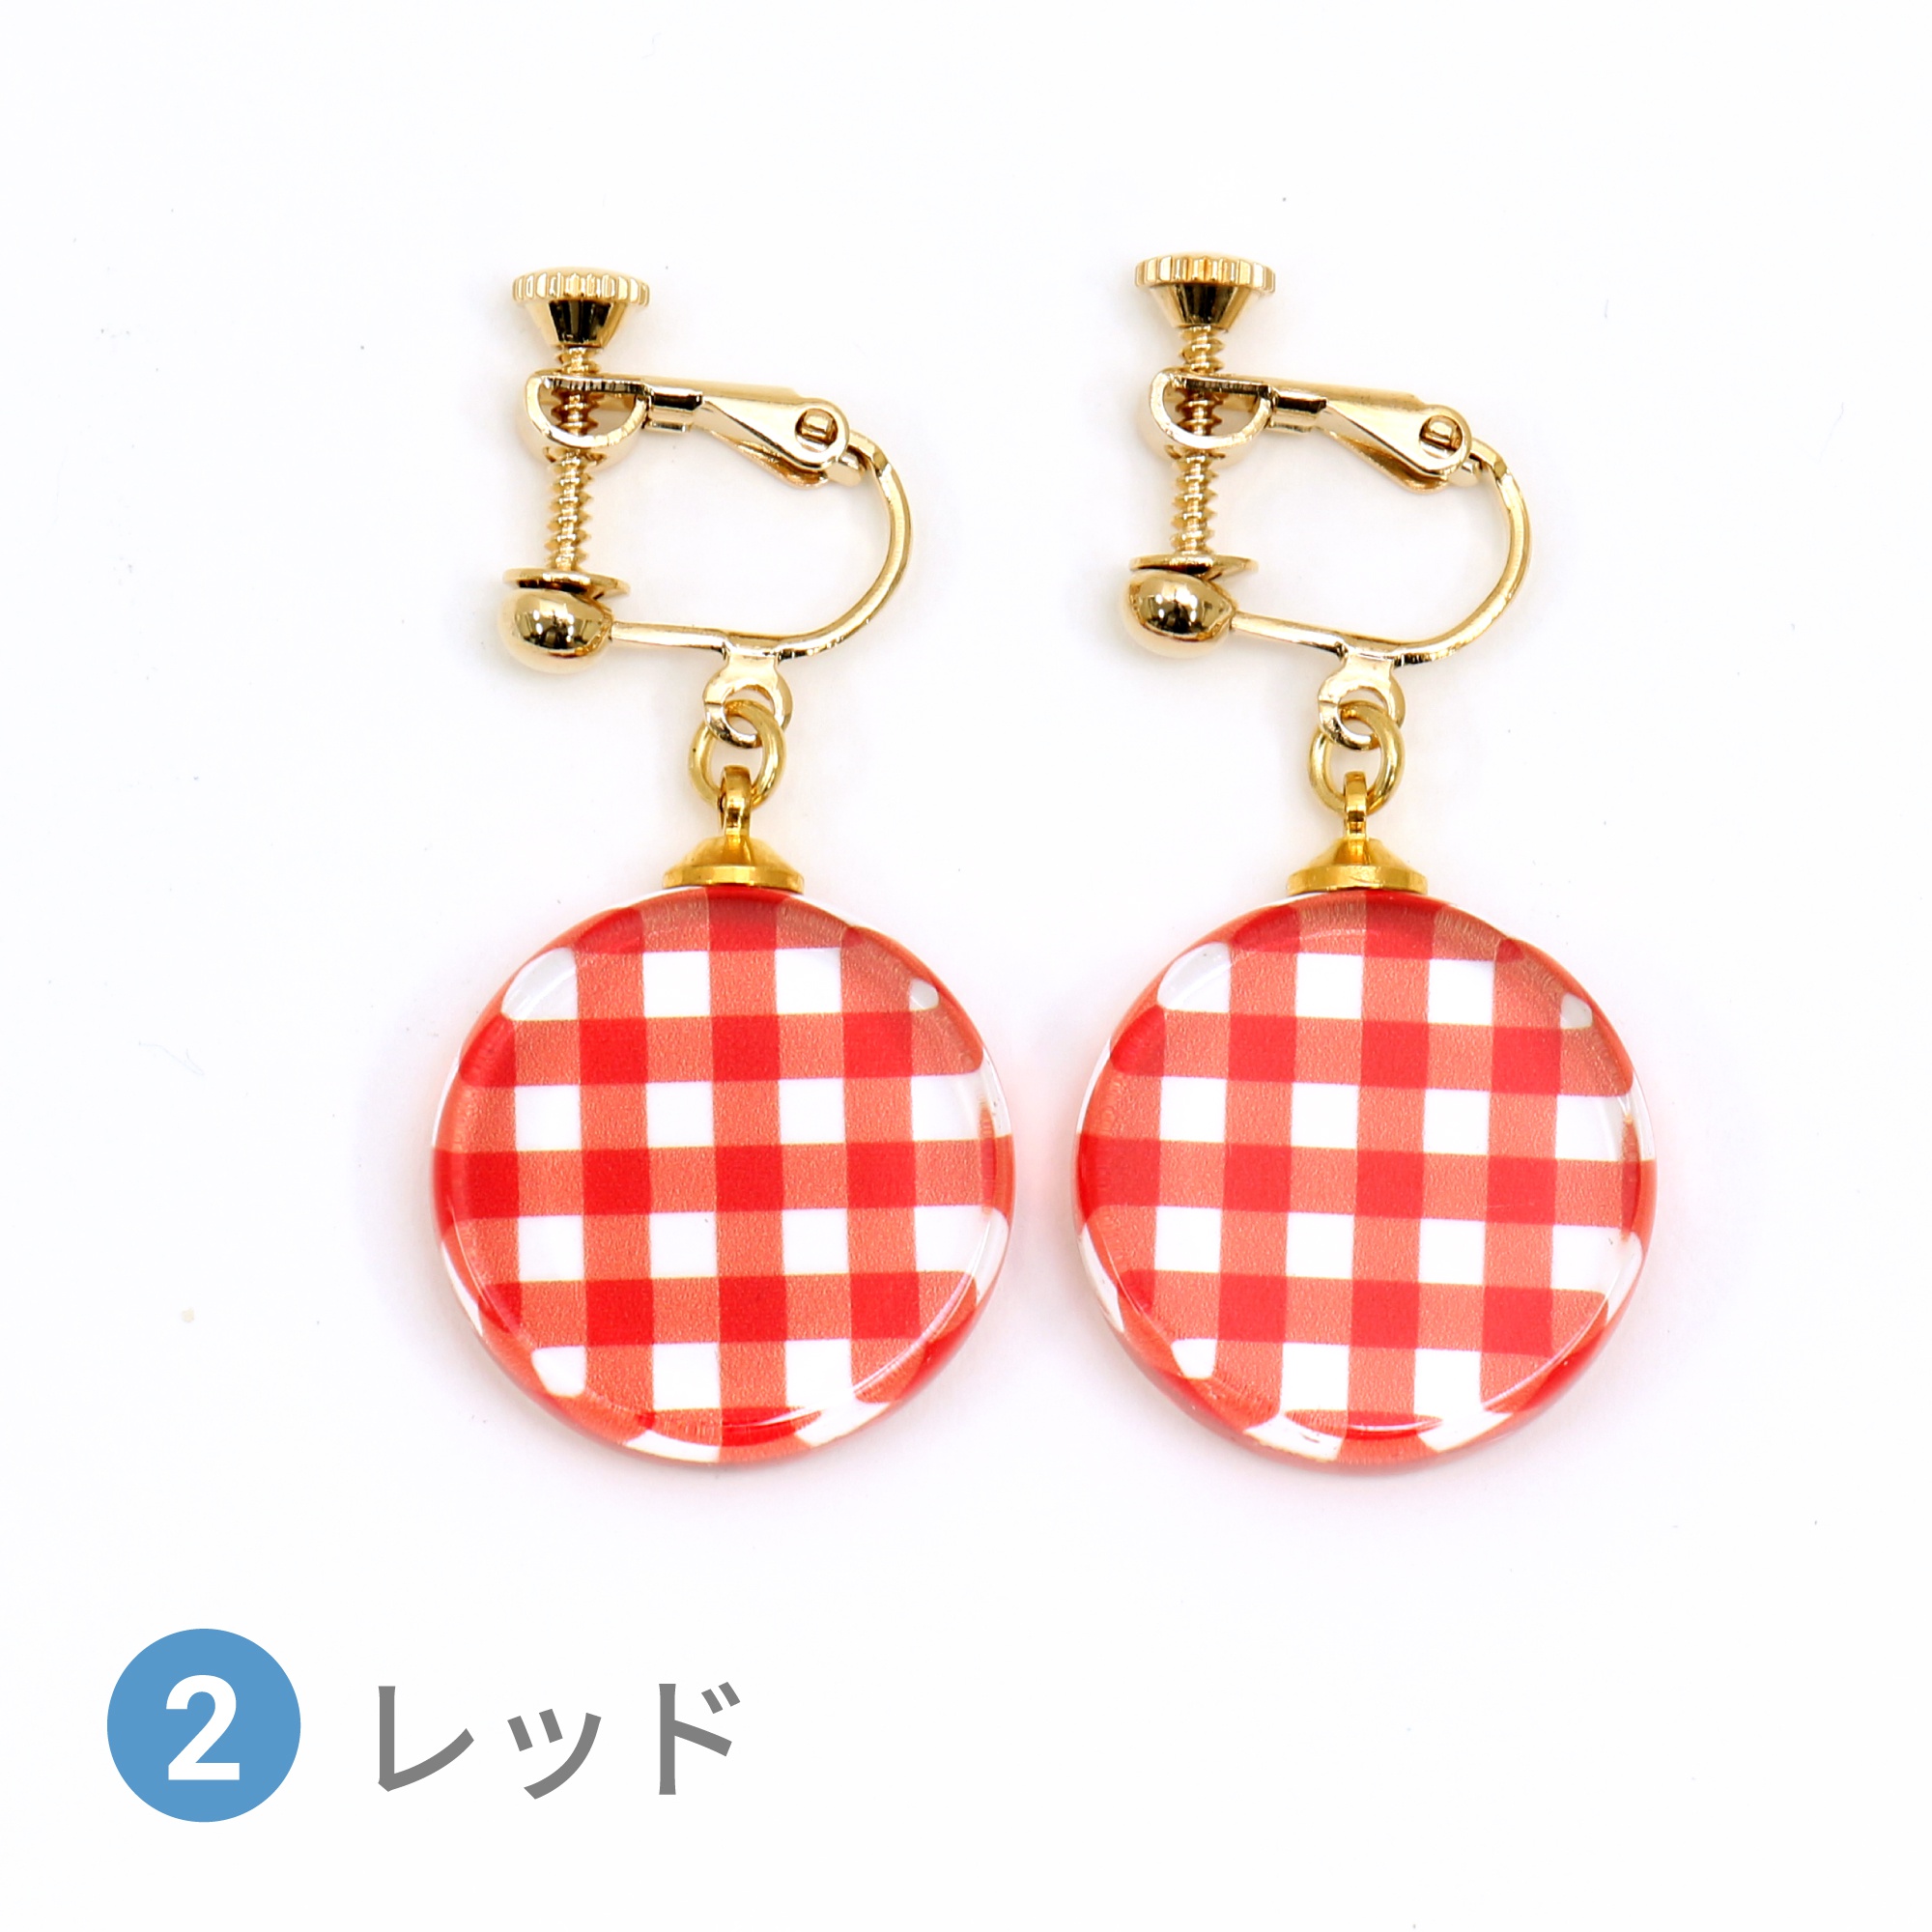 Glass accessories Earring GINGHAM CHECK red round shape